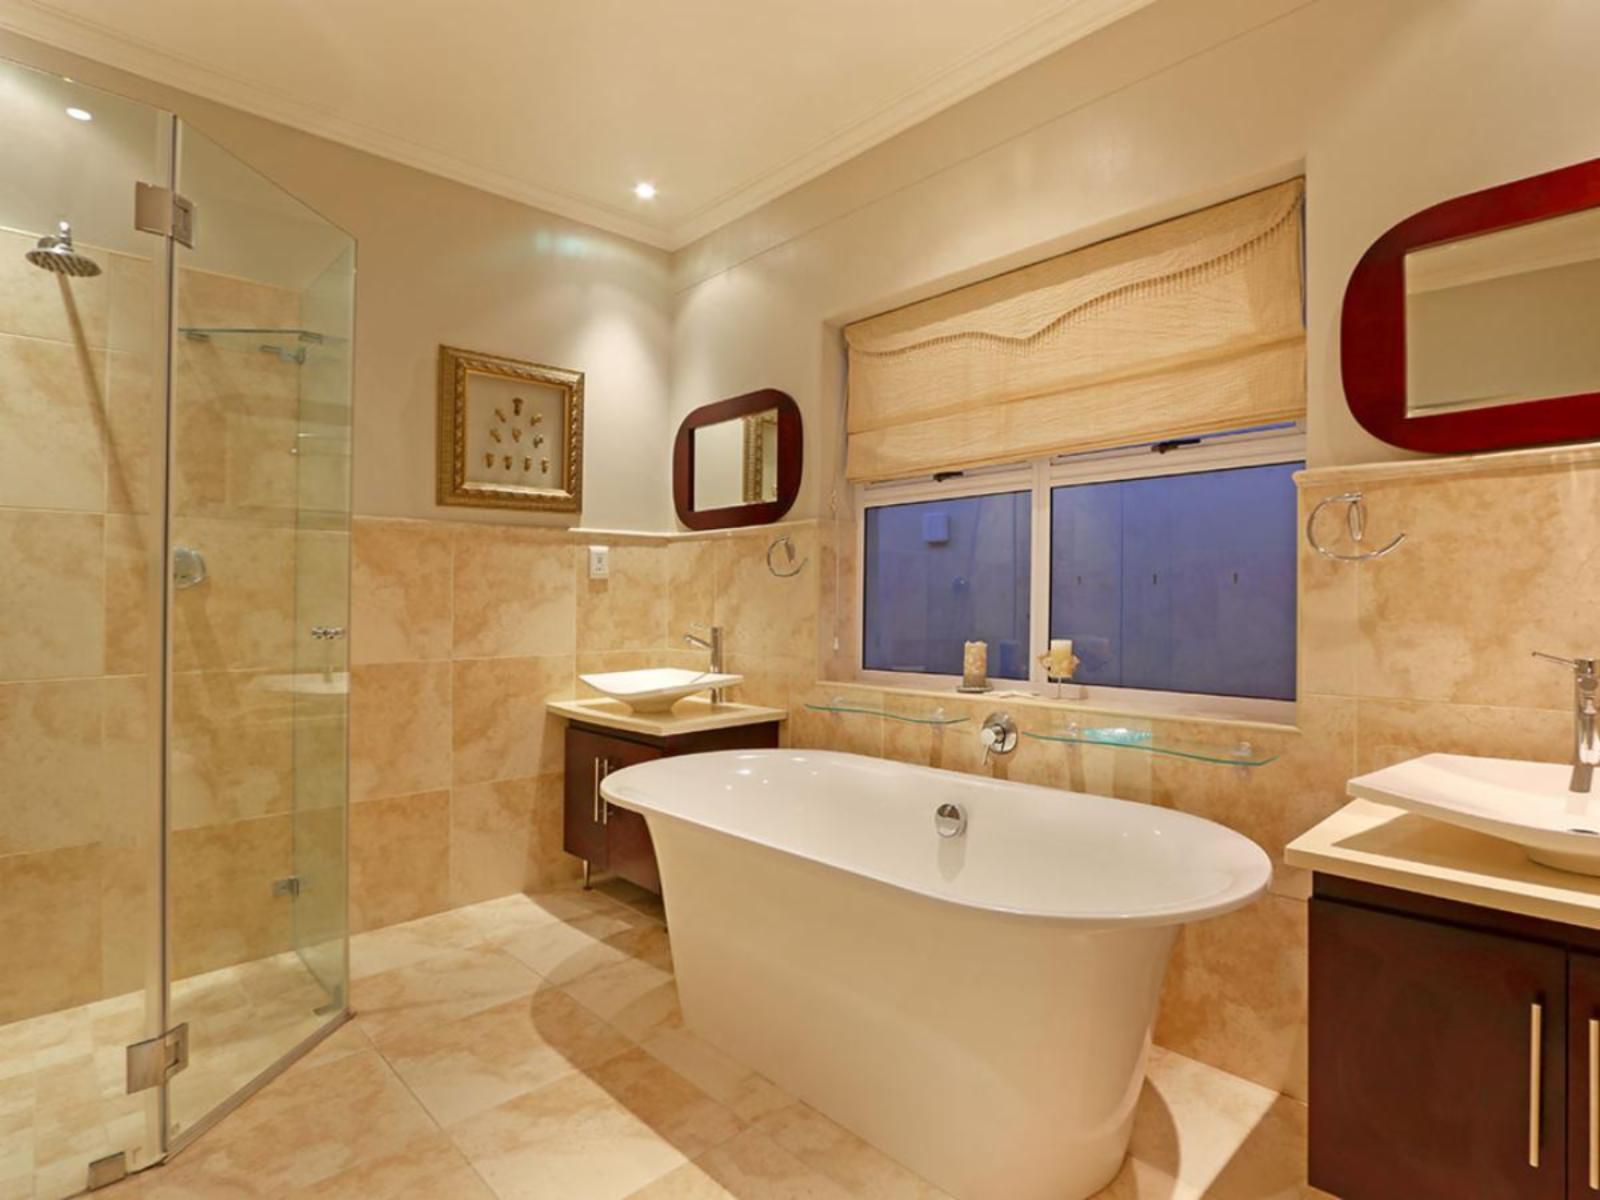 Bayview 30 By Hostagents Bloubergstrand Blouberg Western Cape South Africa Bathroom